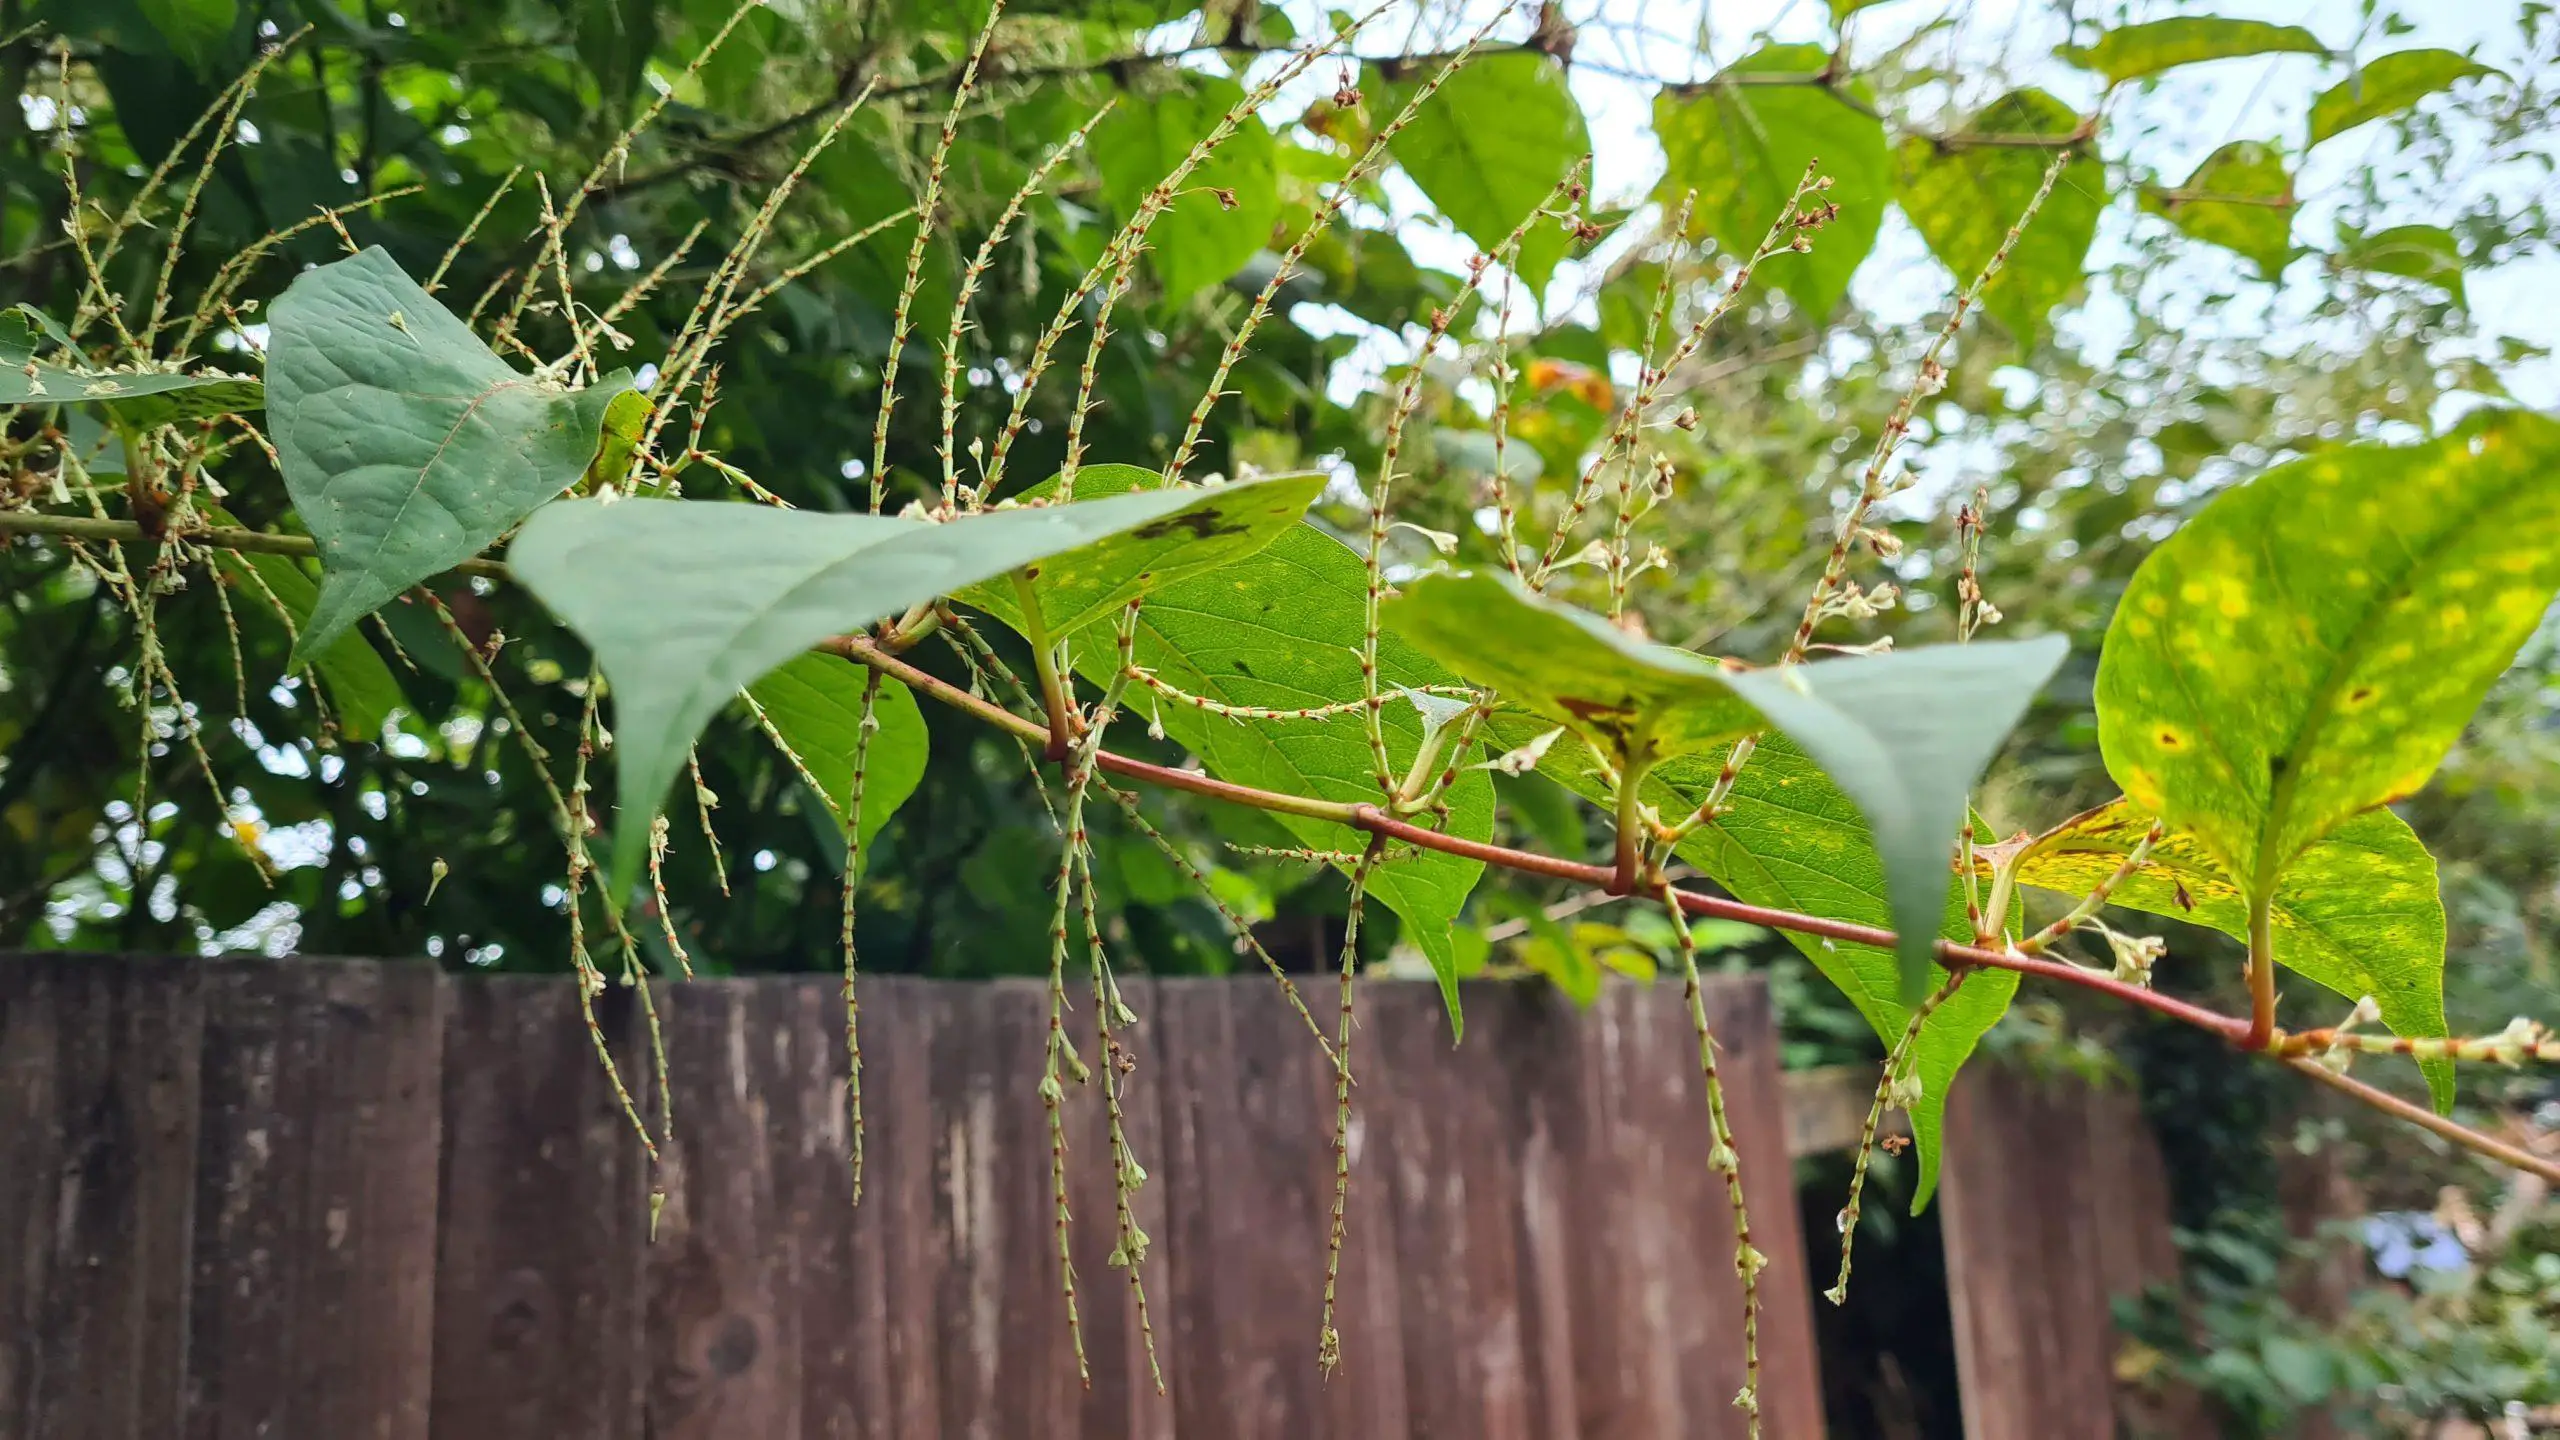 How much does Japanese knotweed cost to remove from your property